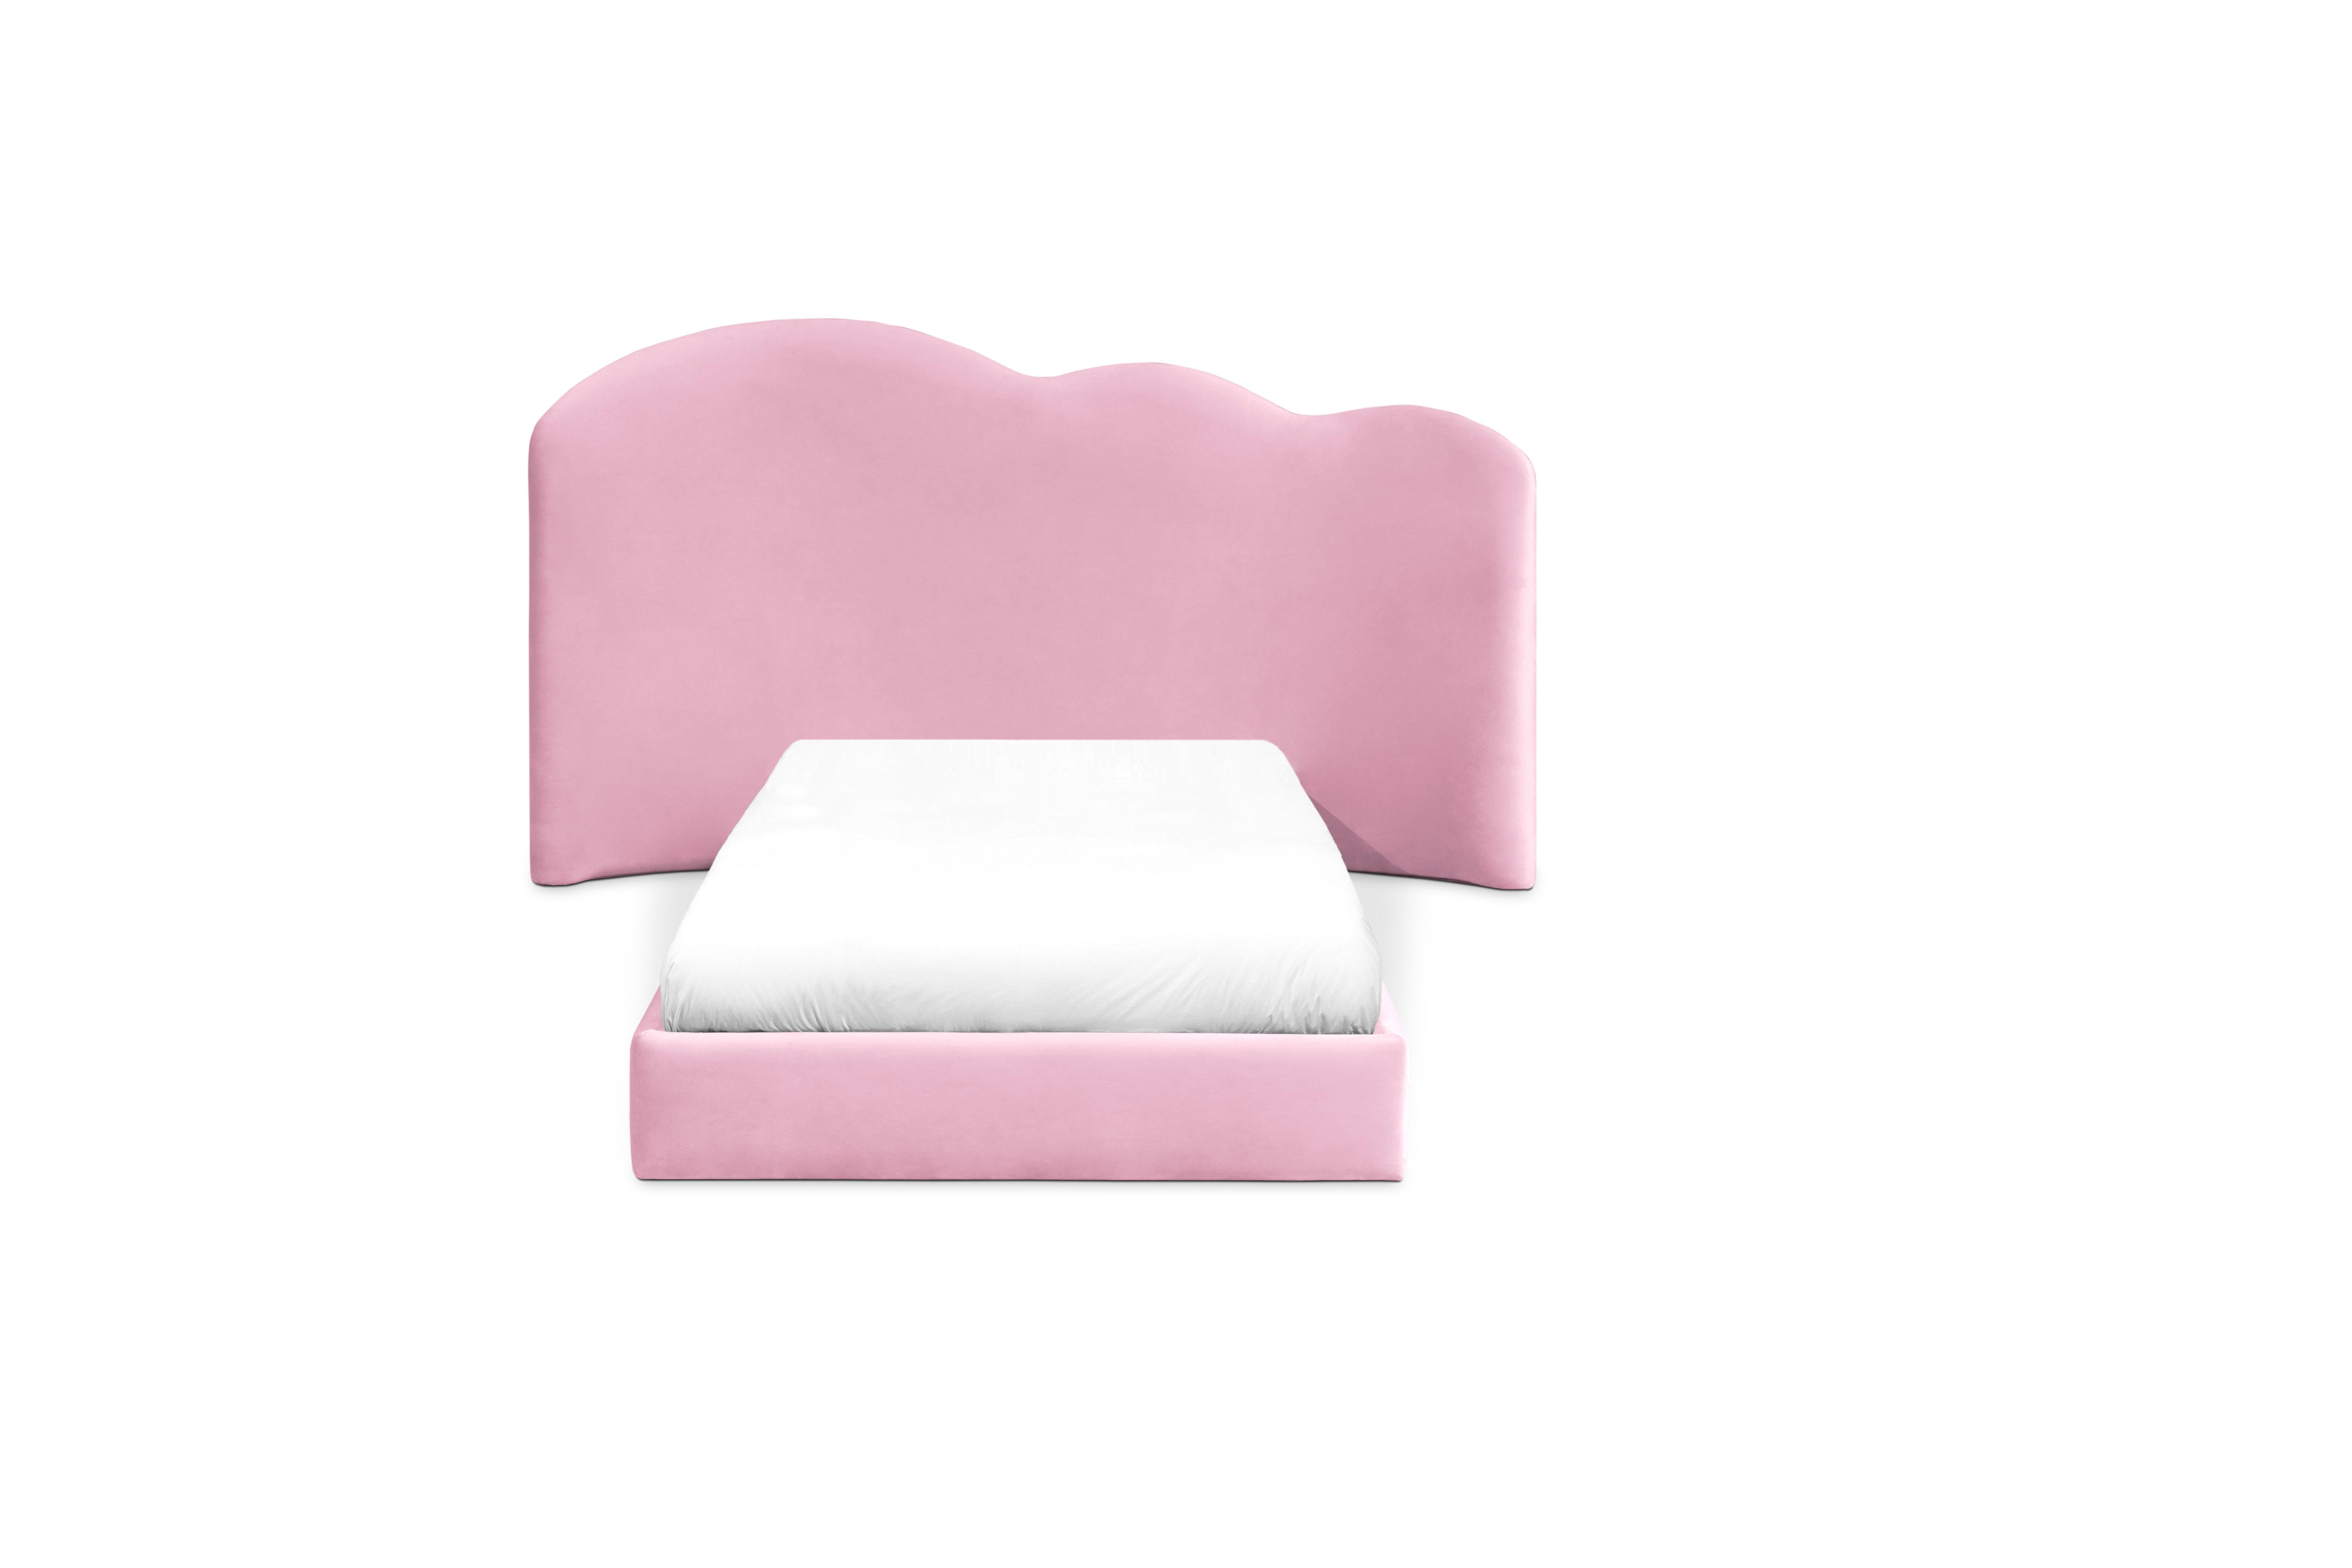 Cloud Kids Bed in Wood and Velvet Finish by Circu Magical Furniture

Cloud Kids Bed in Wood and Velvet Finish by Circu Magical Furniture and its cloud-shaped form is only one of the details that make this piece whimsical and a perfect item for any